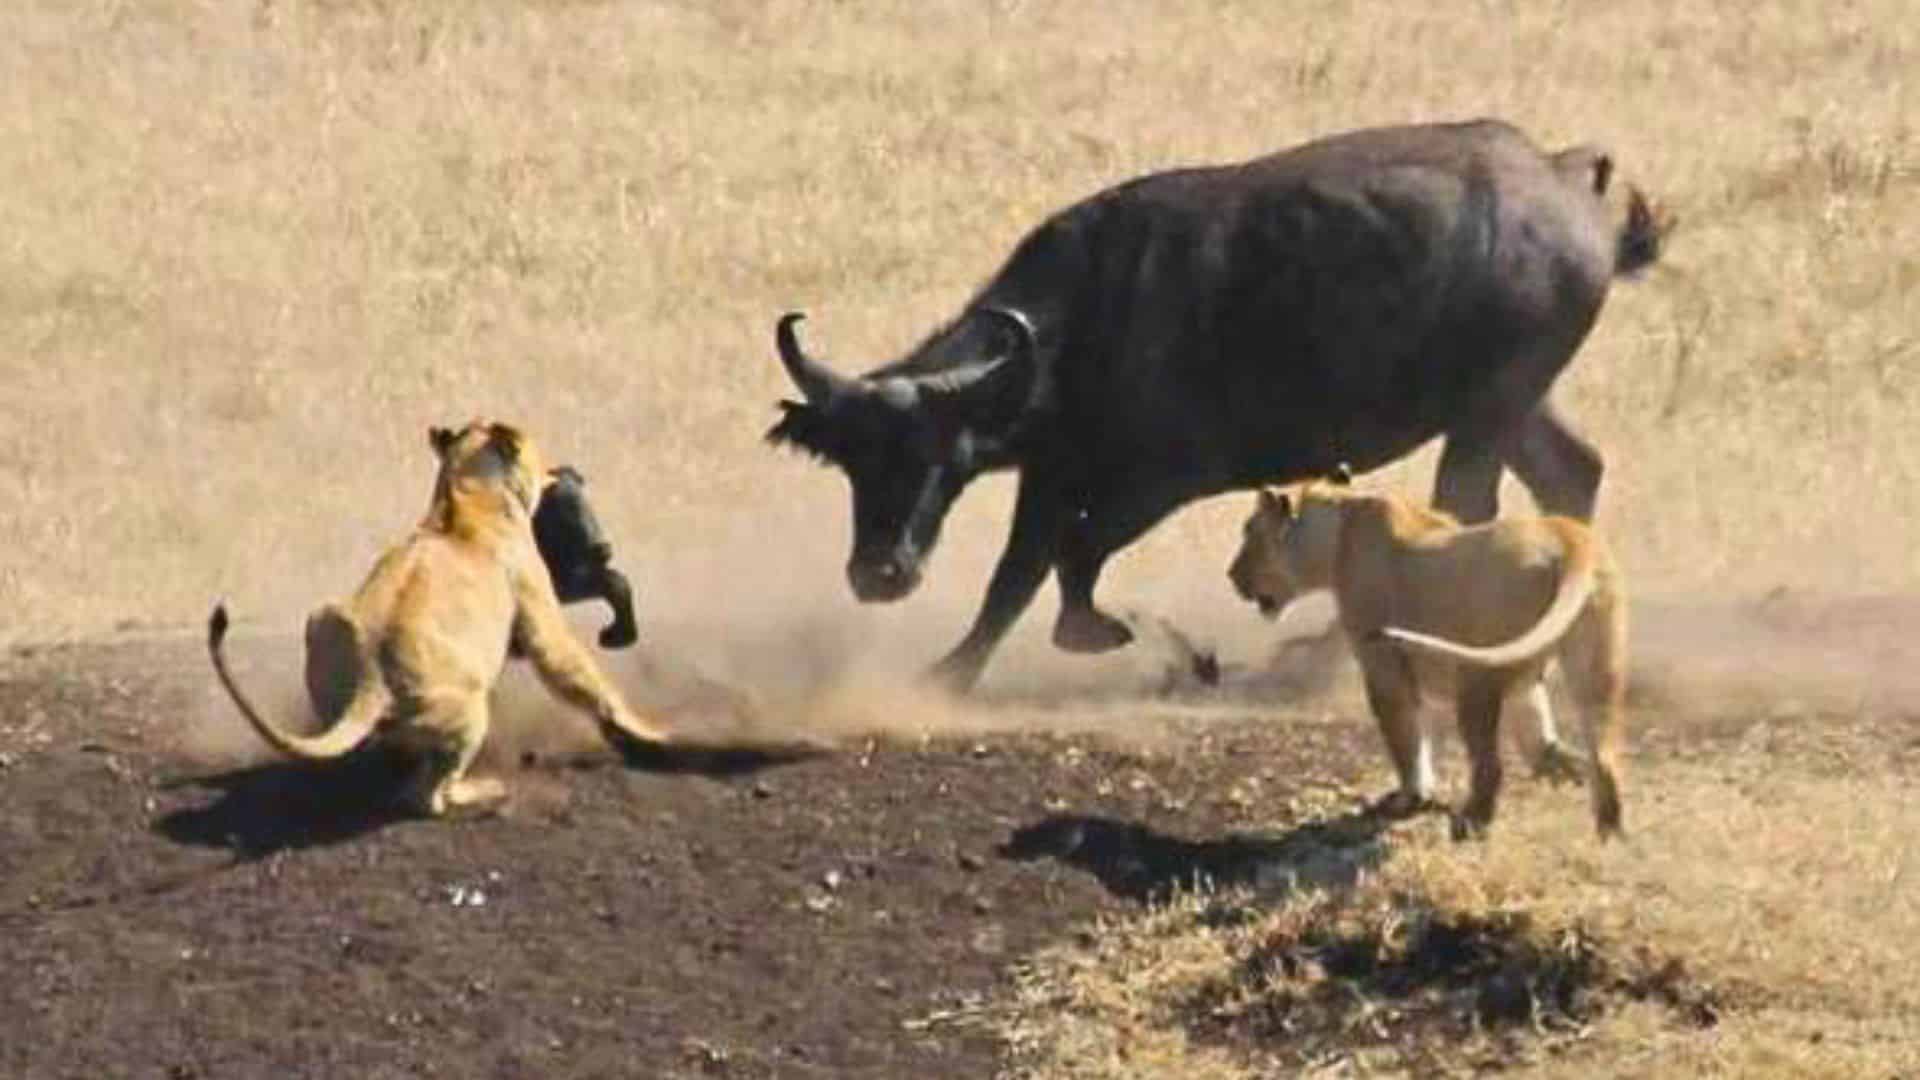 Buffaloes Rescue Baby Elephant from Lions